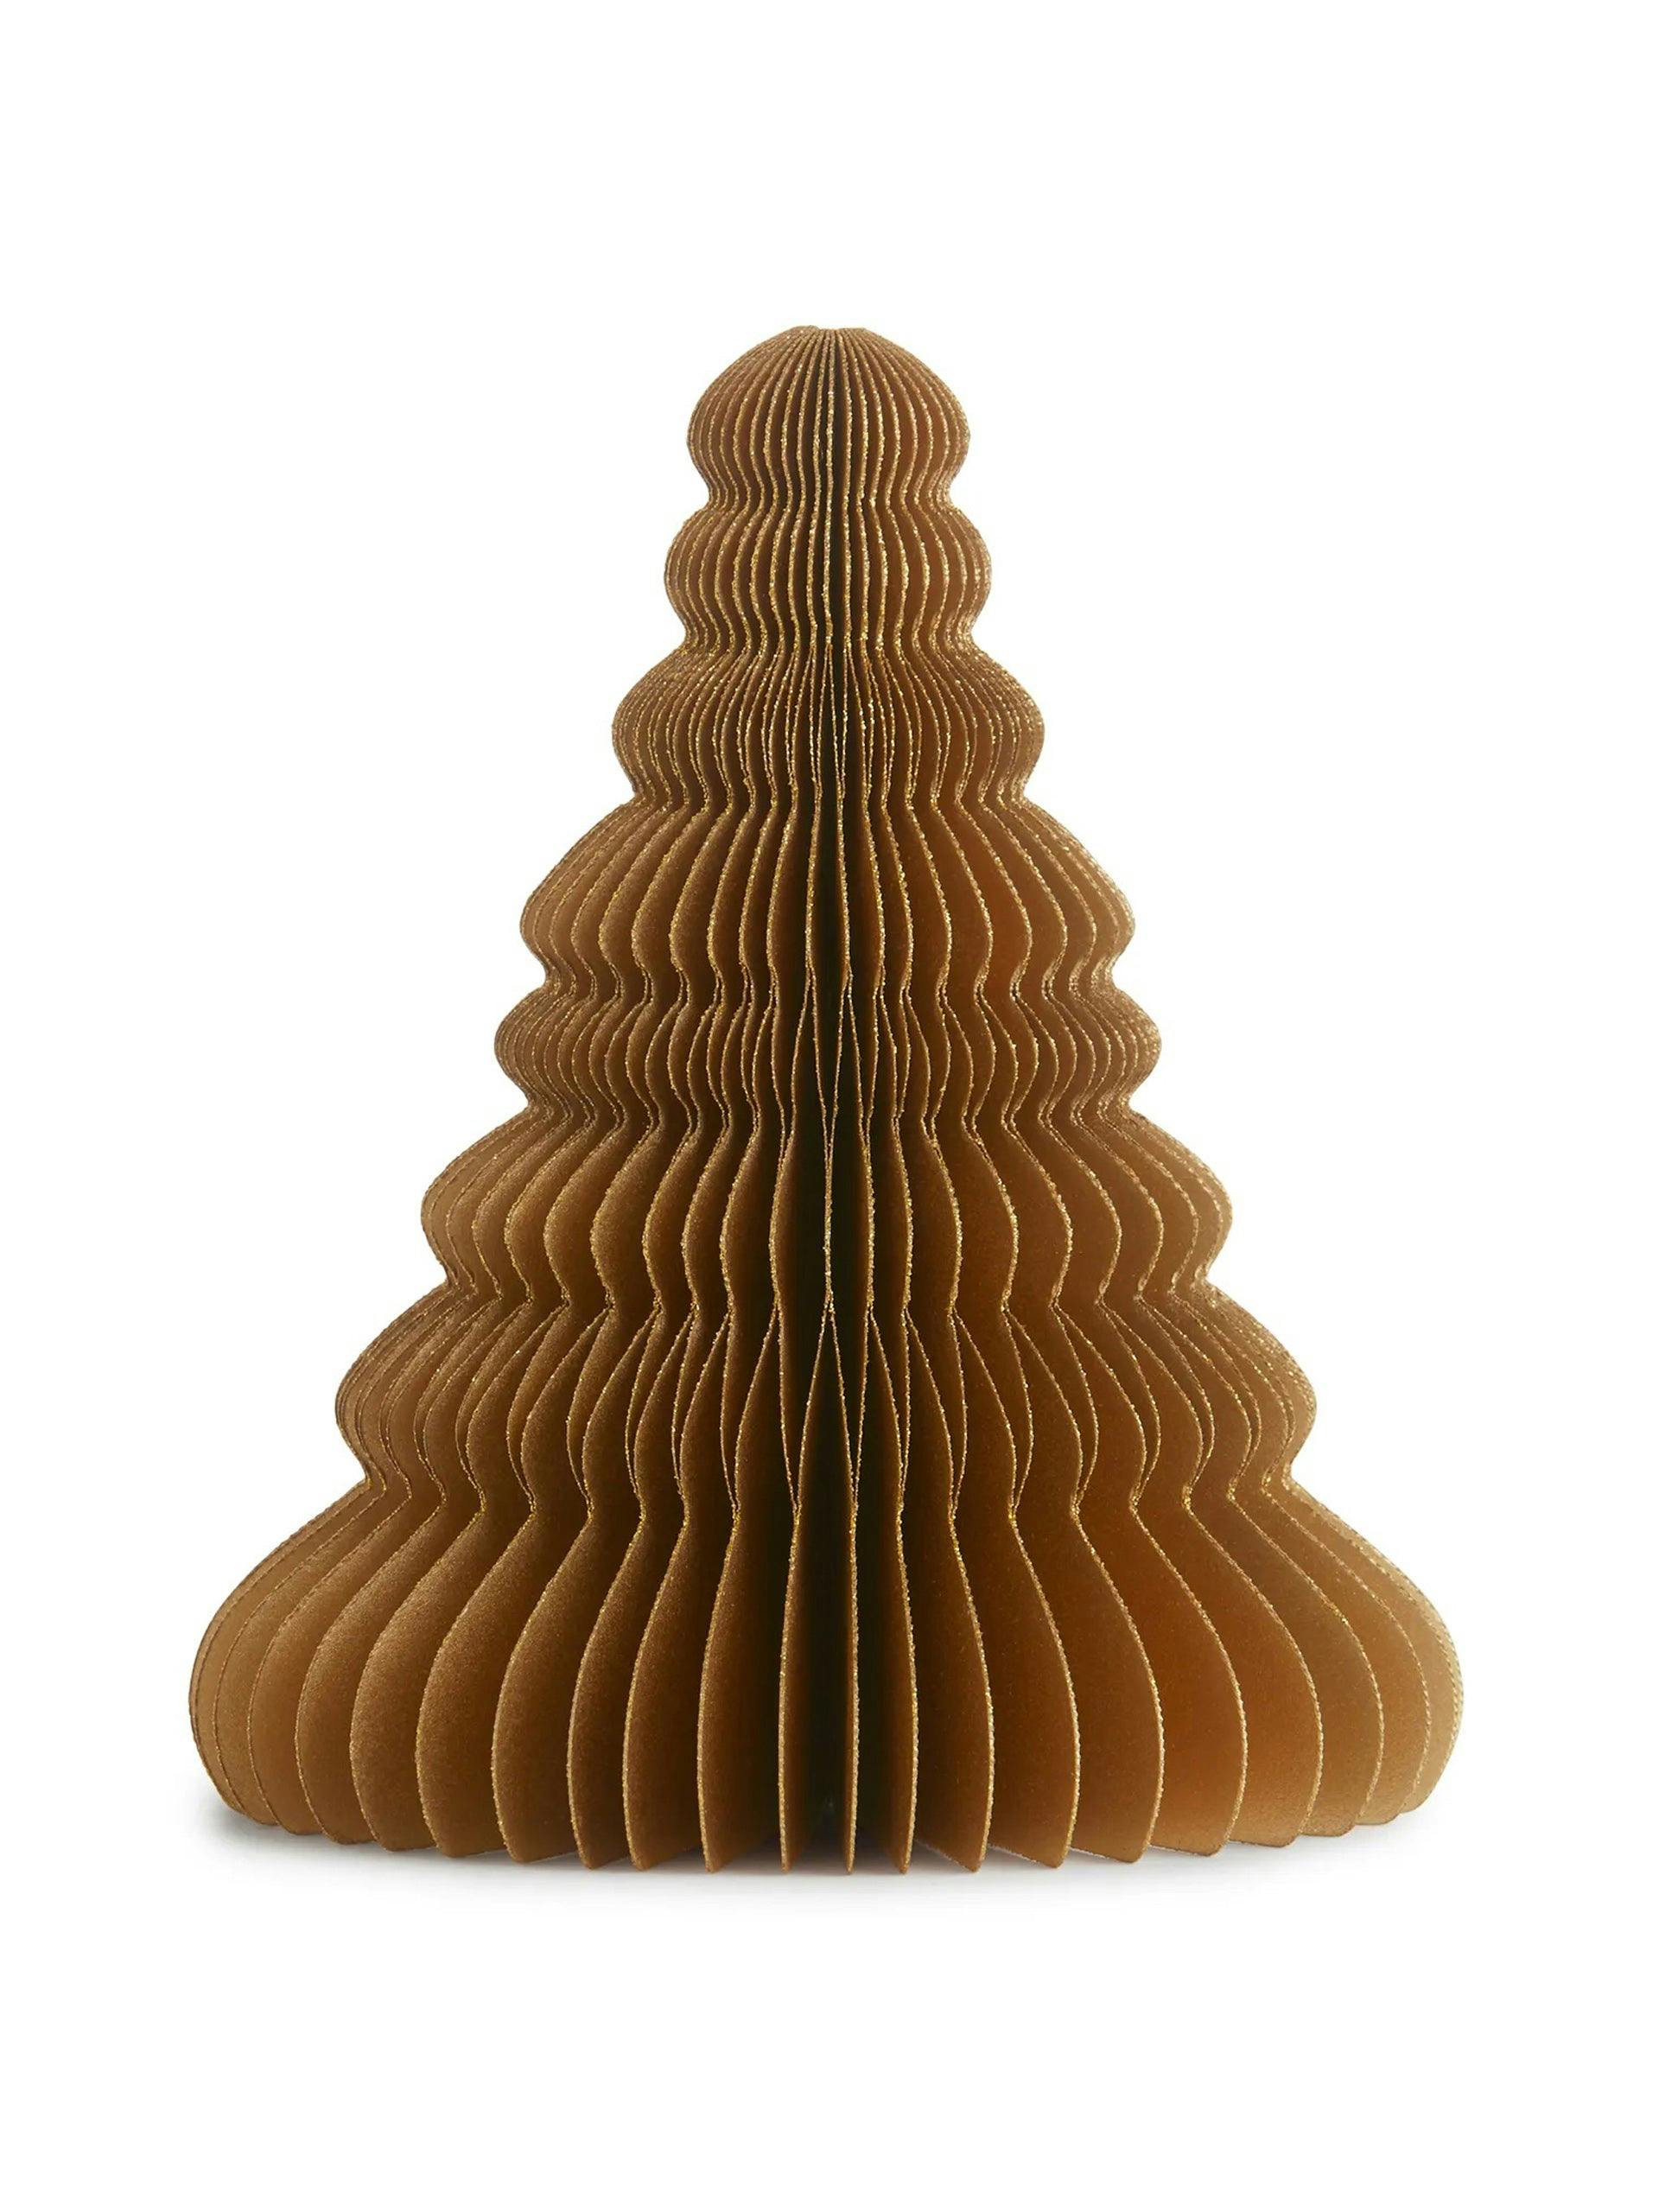 Gold honeycomb paper table decoration